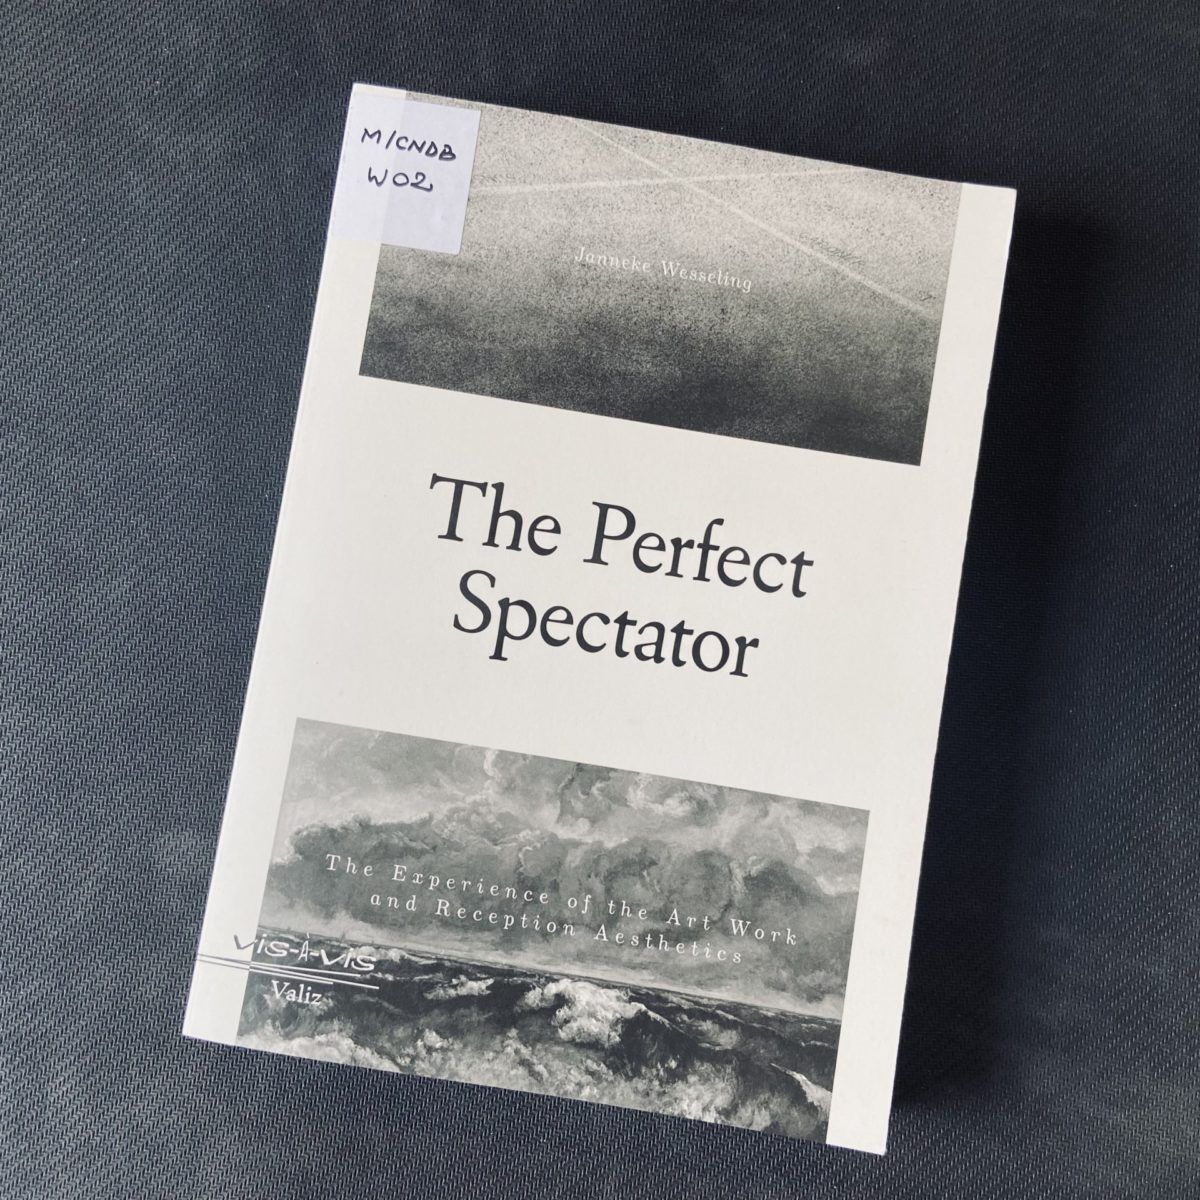 Choreographer Andreea Novac’s recommendation from the CNDB Media Library: The Perfect Spectator